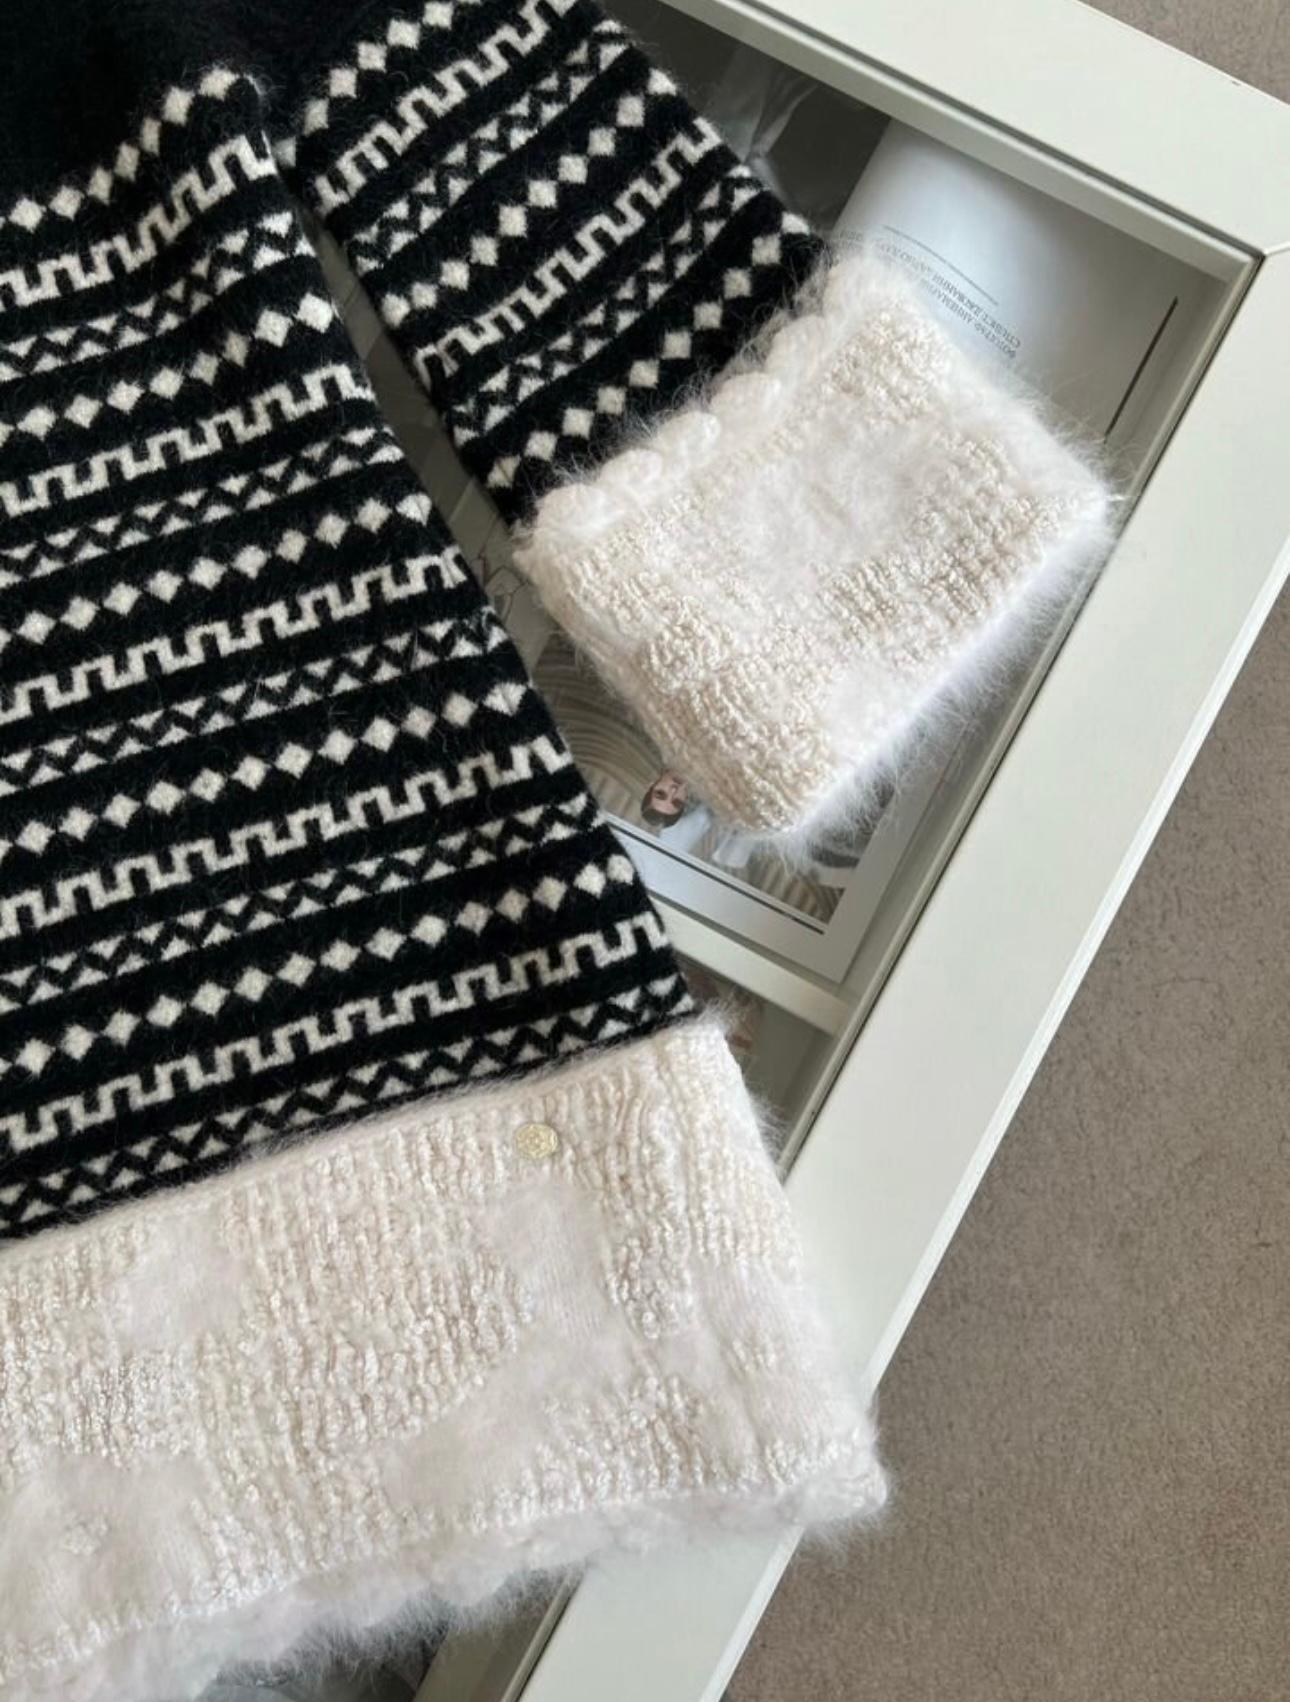 Chanel black and white knit dress with fluffy angora accents from ARCTIC ICE Collection.
- CC logo charm at side
Size mark 36 FR. Pristine condition.